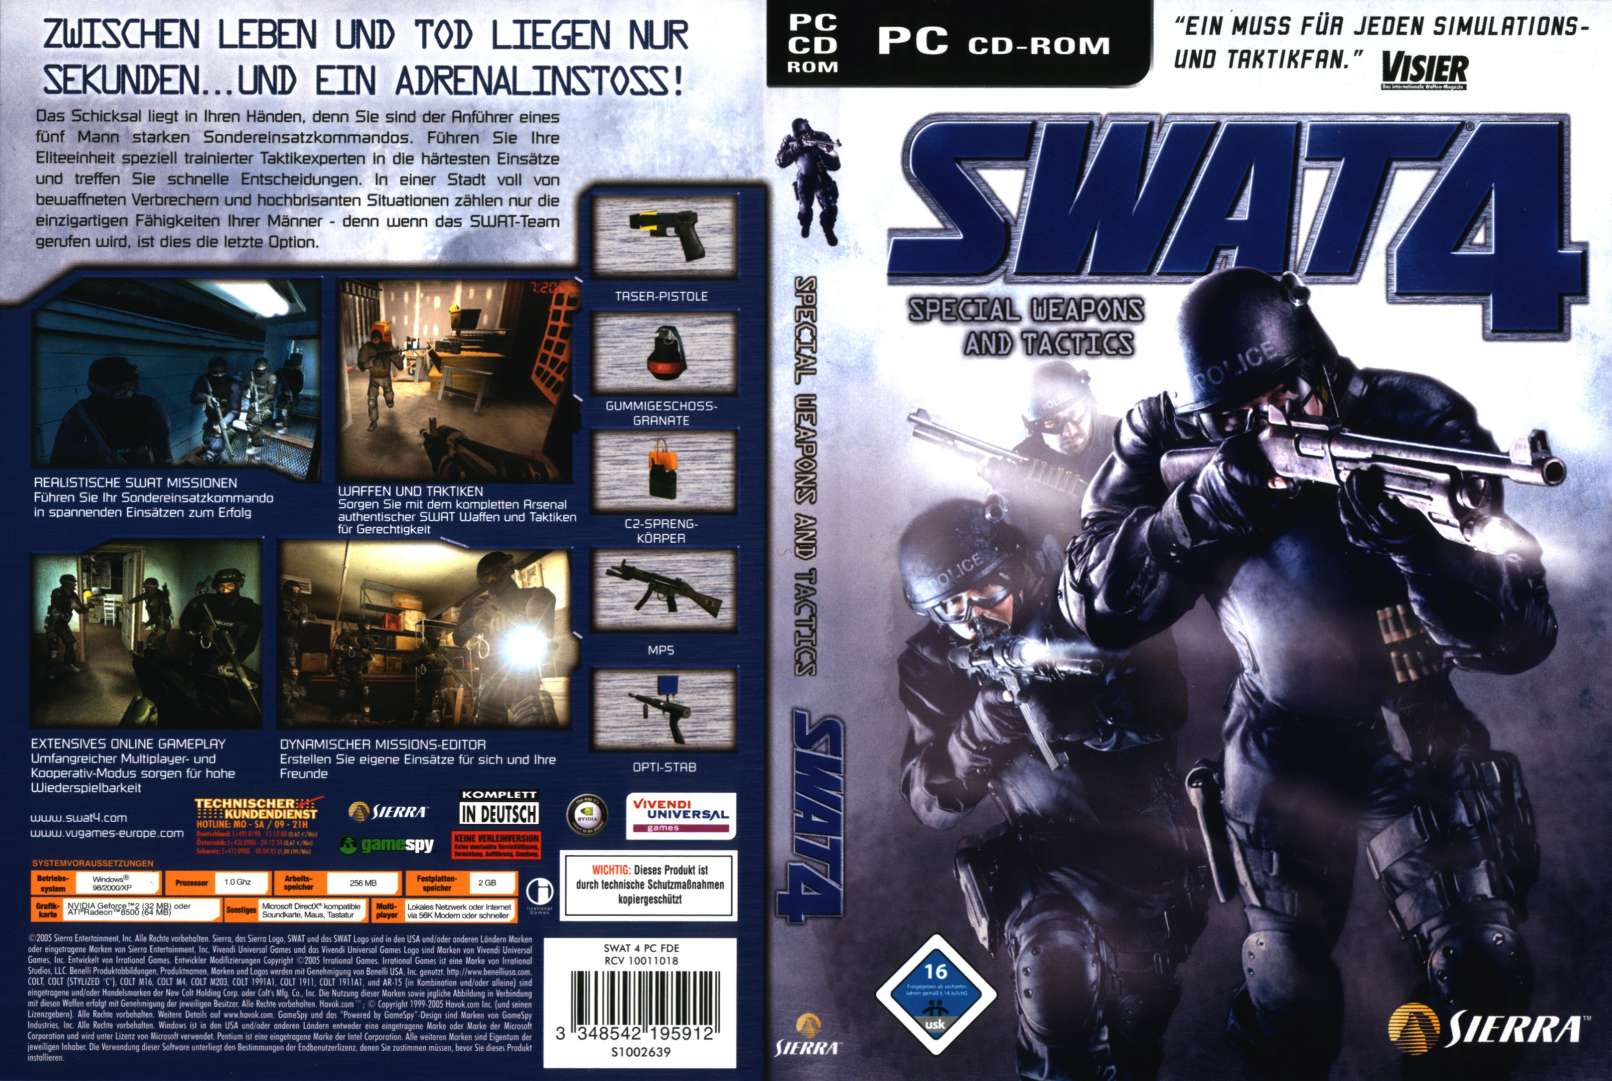 Swat 4: Special Weapons and Tactics - DVD obal